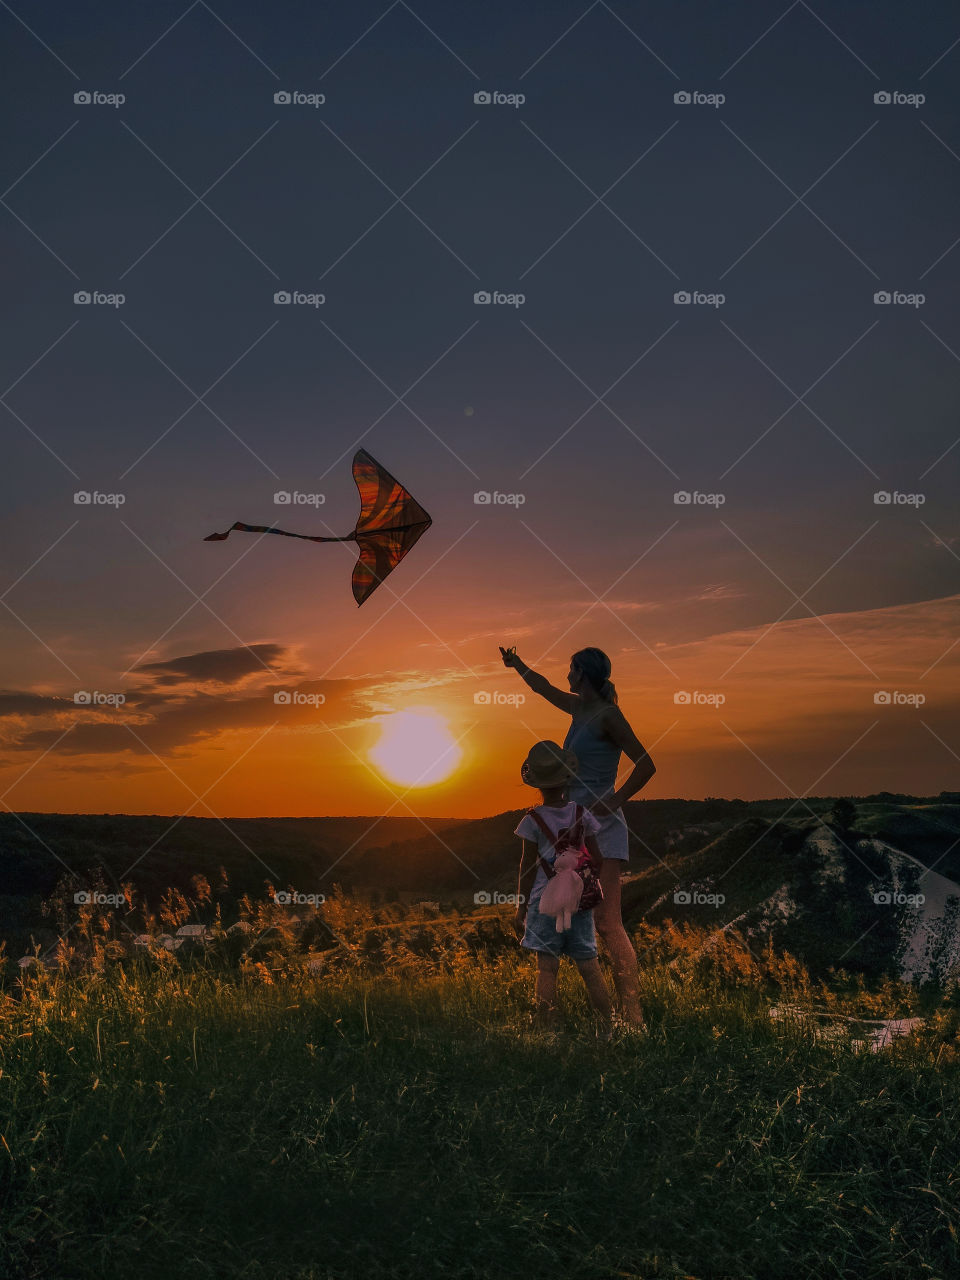 A child and his mother fly a kite at sunset